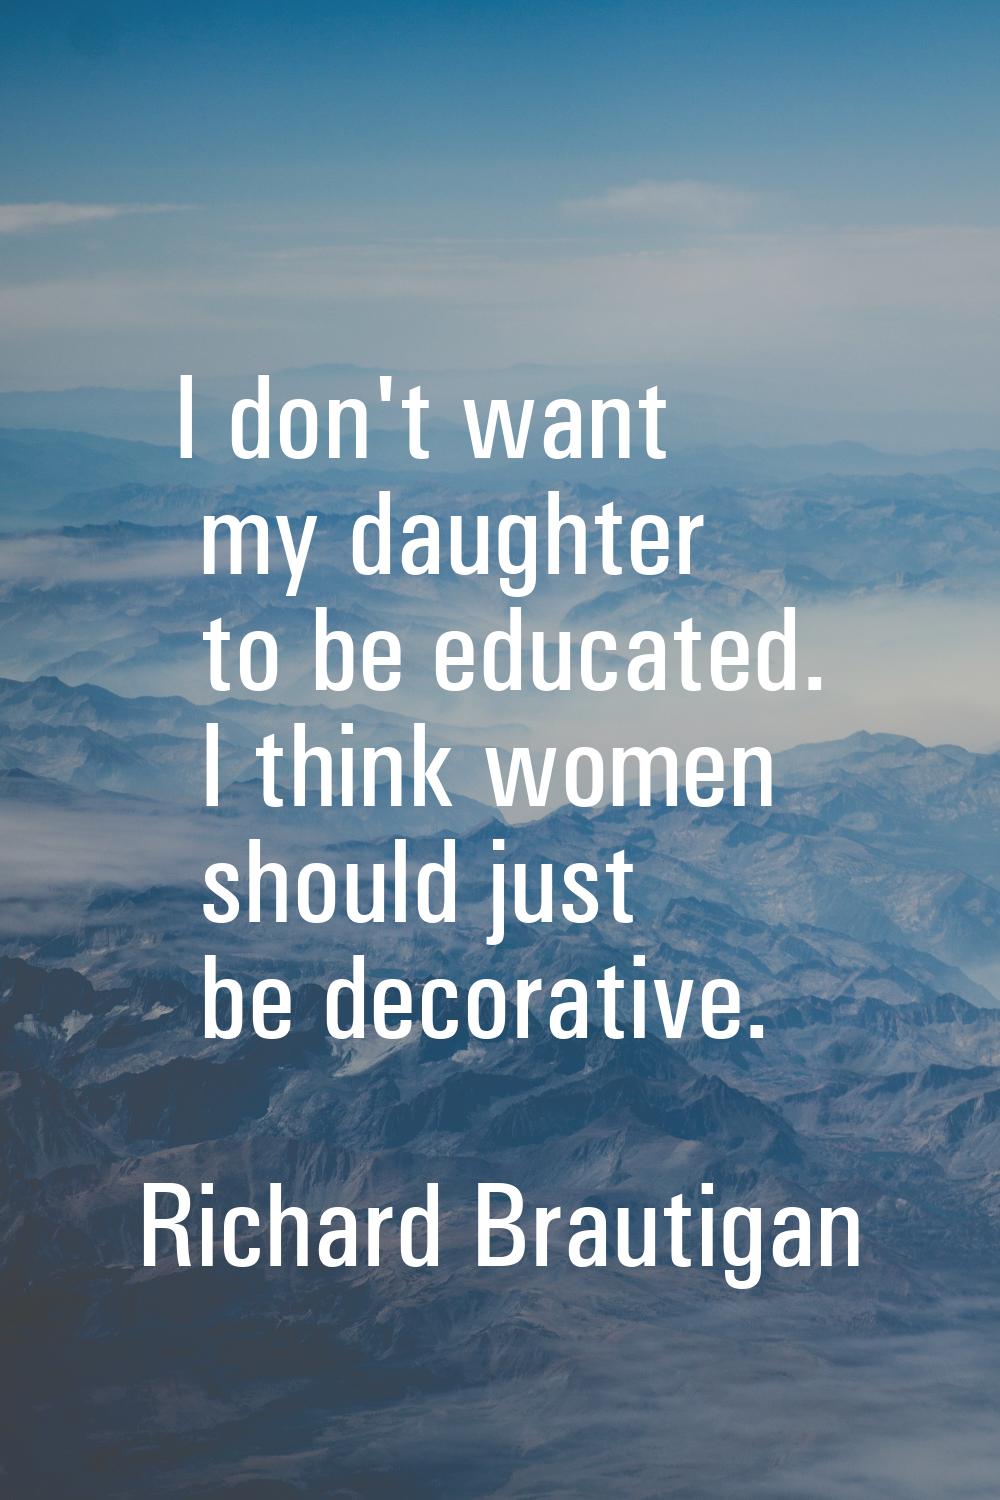 I don't want my daughter to be educated. I think women should just be decorative.